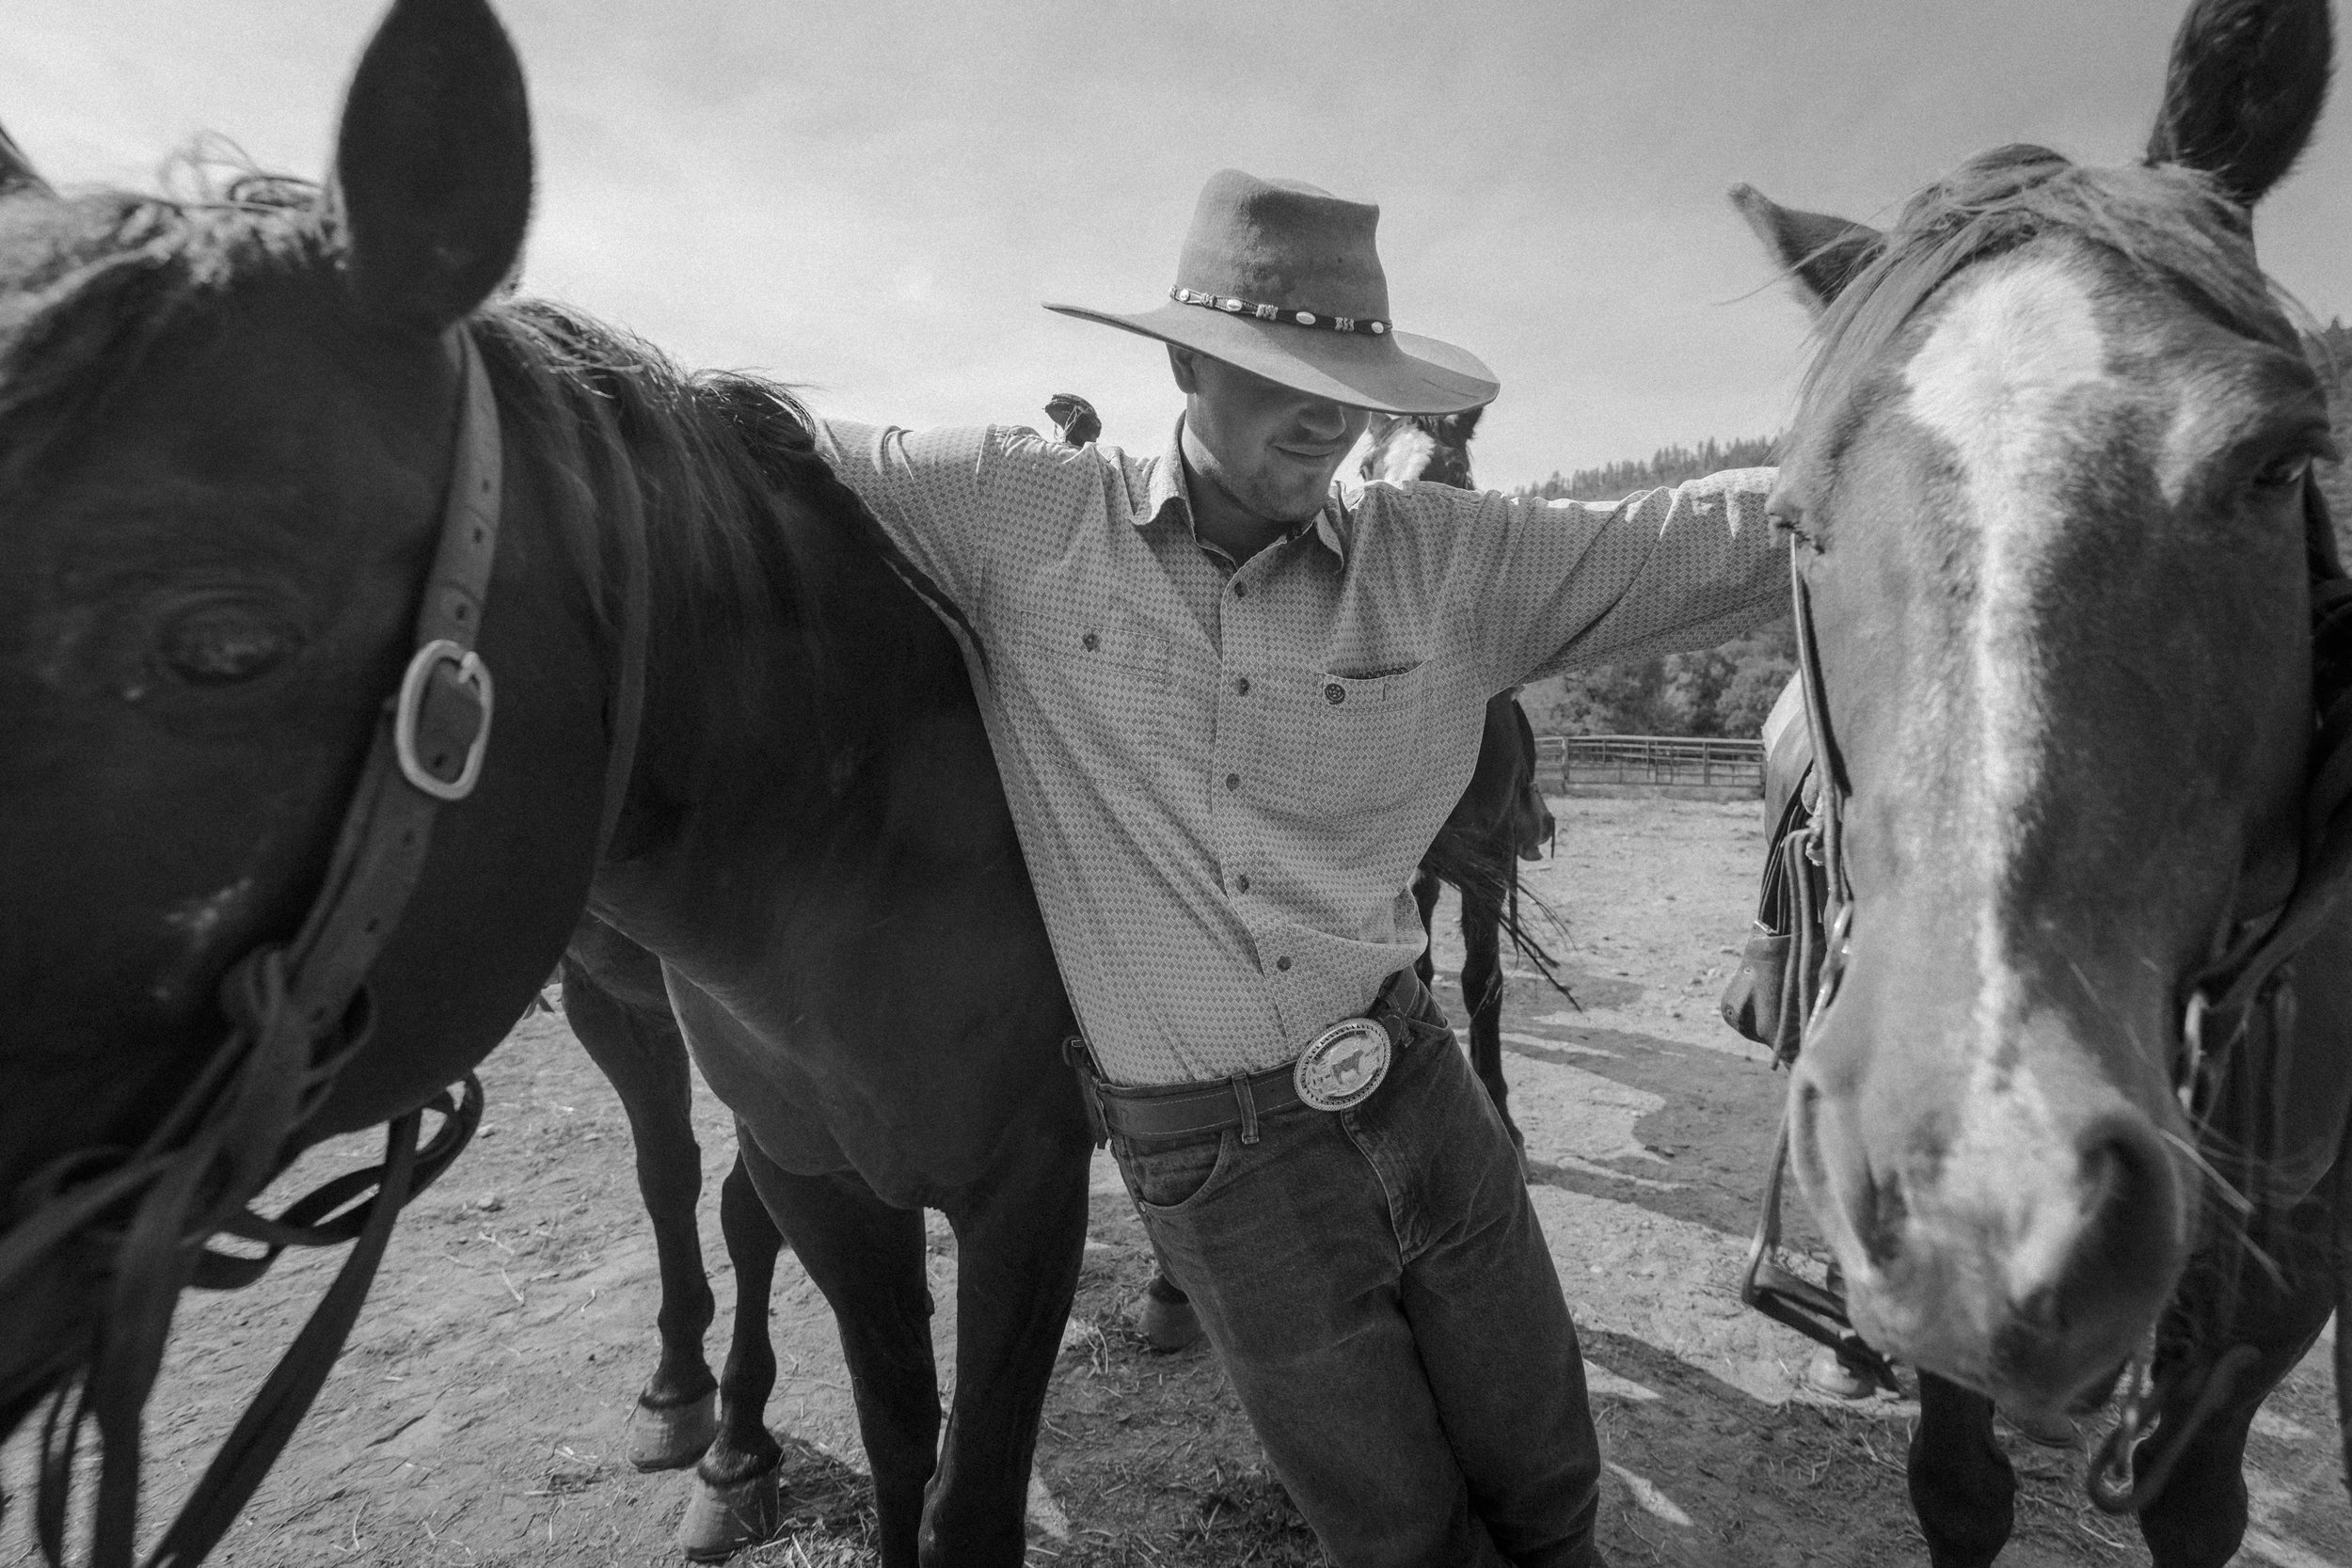  Alex McLendon embraces two horses at Ponil on Philmont Scout Ranch, N.M. on June 13, 2021. McLendon worked as a wrangler for the summer season on the ranch helping to take care of horses and burros.   